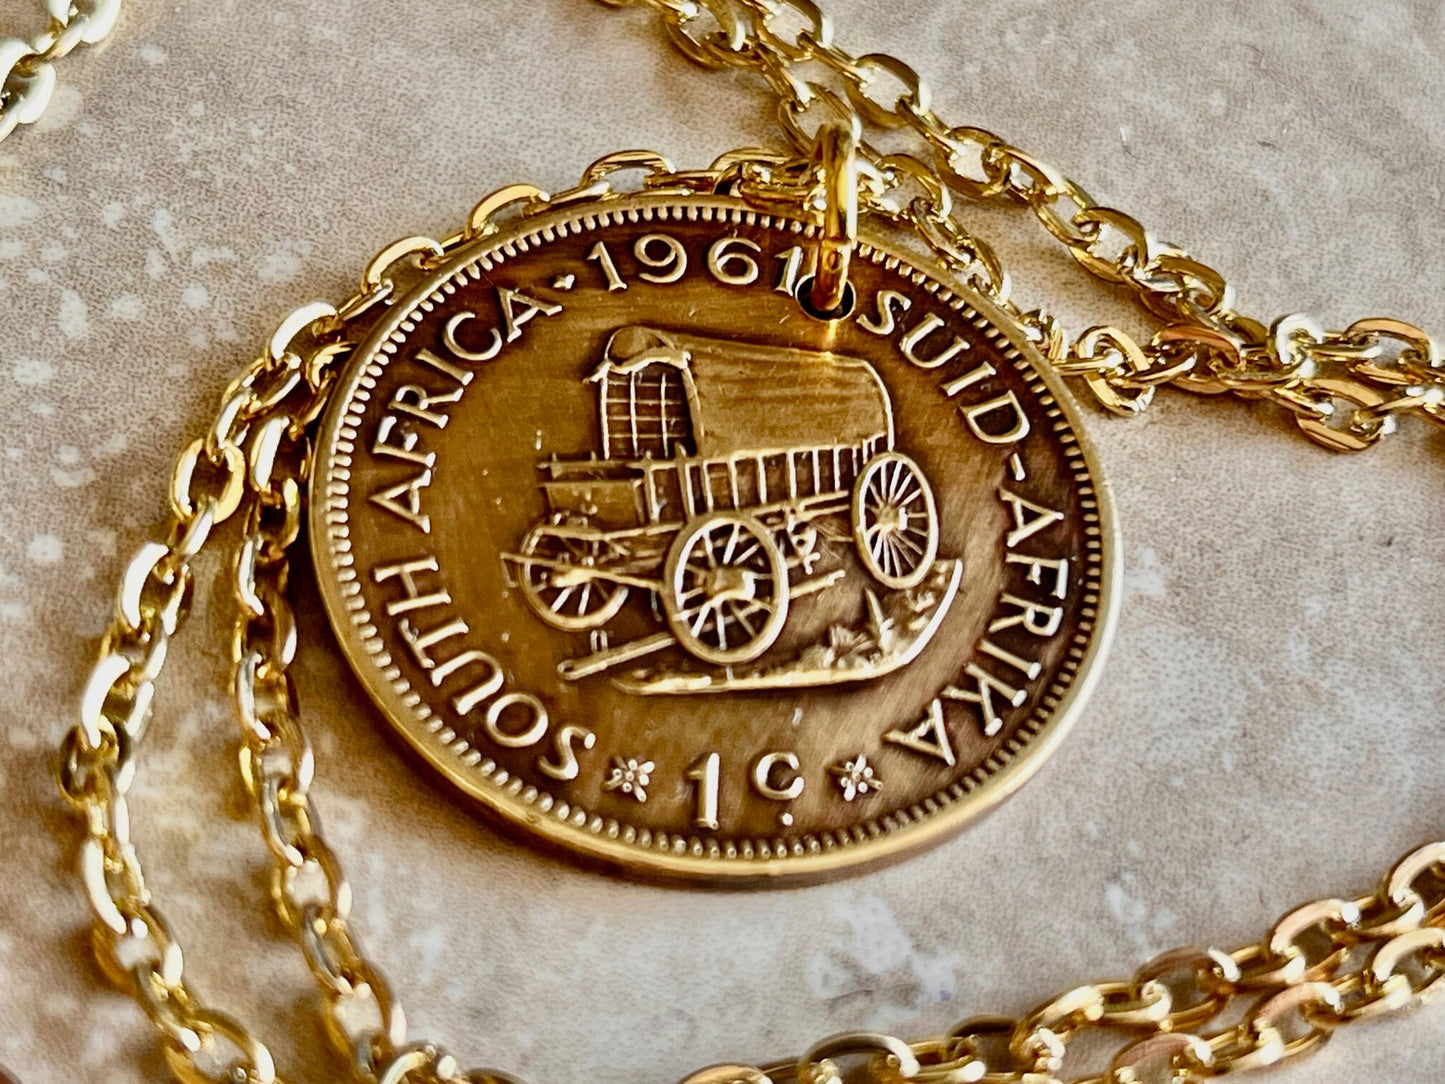 South Africa 1 Cent Coin Africka Pendant Personal Necklace Old Vintage Handmade Jewelry Gift Friend Charm For Him Her World Coin Collector